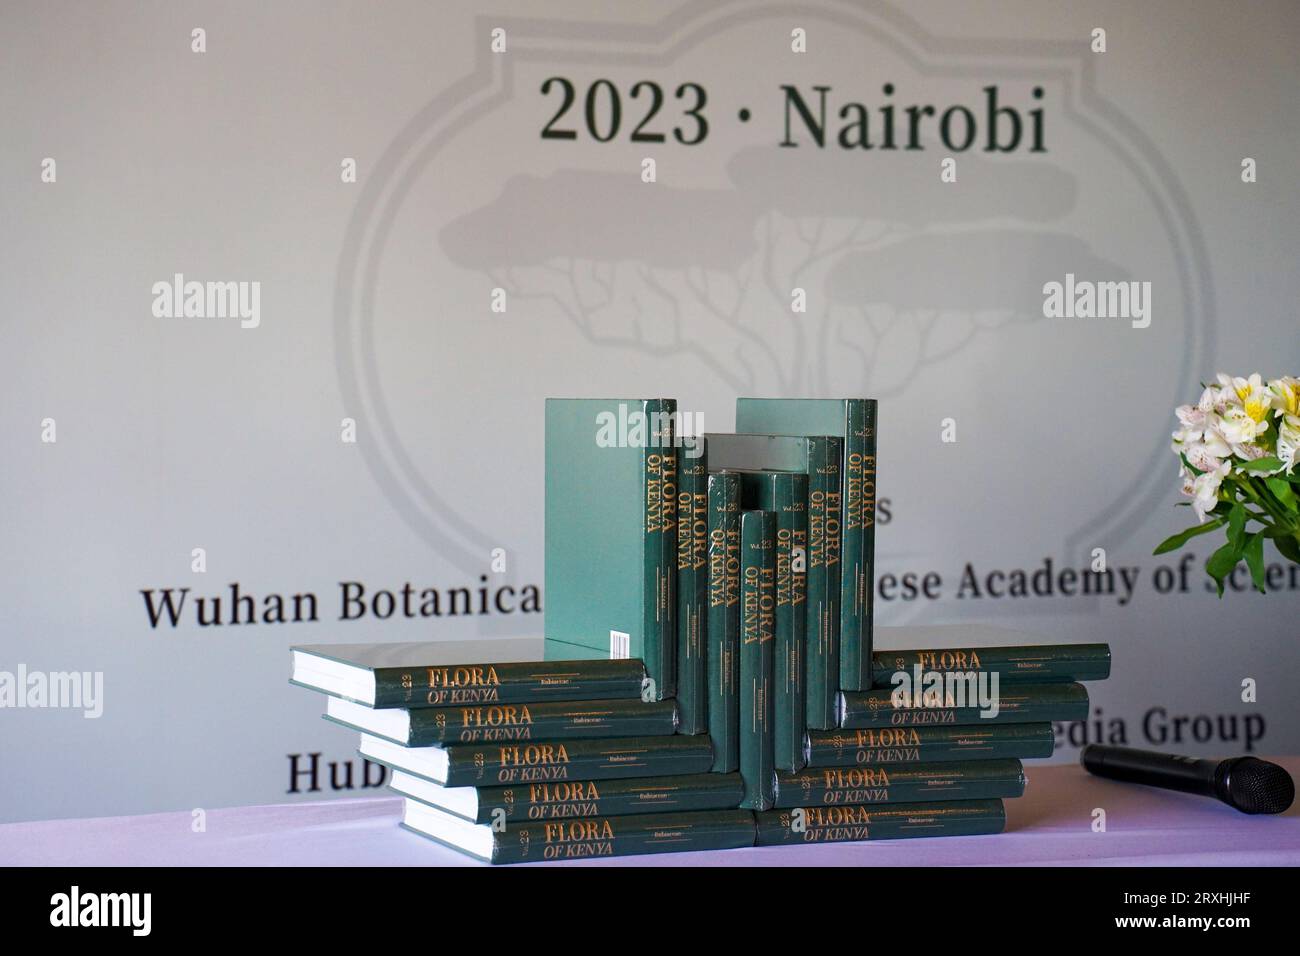 (230925) -- NAIROBI, Sept. 25, 2023 (Xinhua) -- Photo taken on Sept. 25, 2023 shows books of the 23rd volume 'Rubiaceae' of the Flora of Kenya at a book launch in Nairobi, Kenya. Scientists from China and Kenya on Monday launched a volume of the Flora of Kenya in Nairobi, marking the publication of Kenya's first national flora and filling the gap in the field of plant resources research in the country. The Flora of Kenya, which is divided into 31 volumes, will document the East African nation's nearly 7,000 plant species from 223 families. The 23rd volume, 'Rubiaceae,' is the first part of the Stock Photo